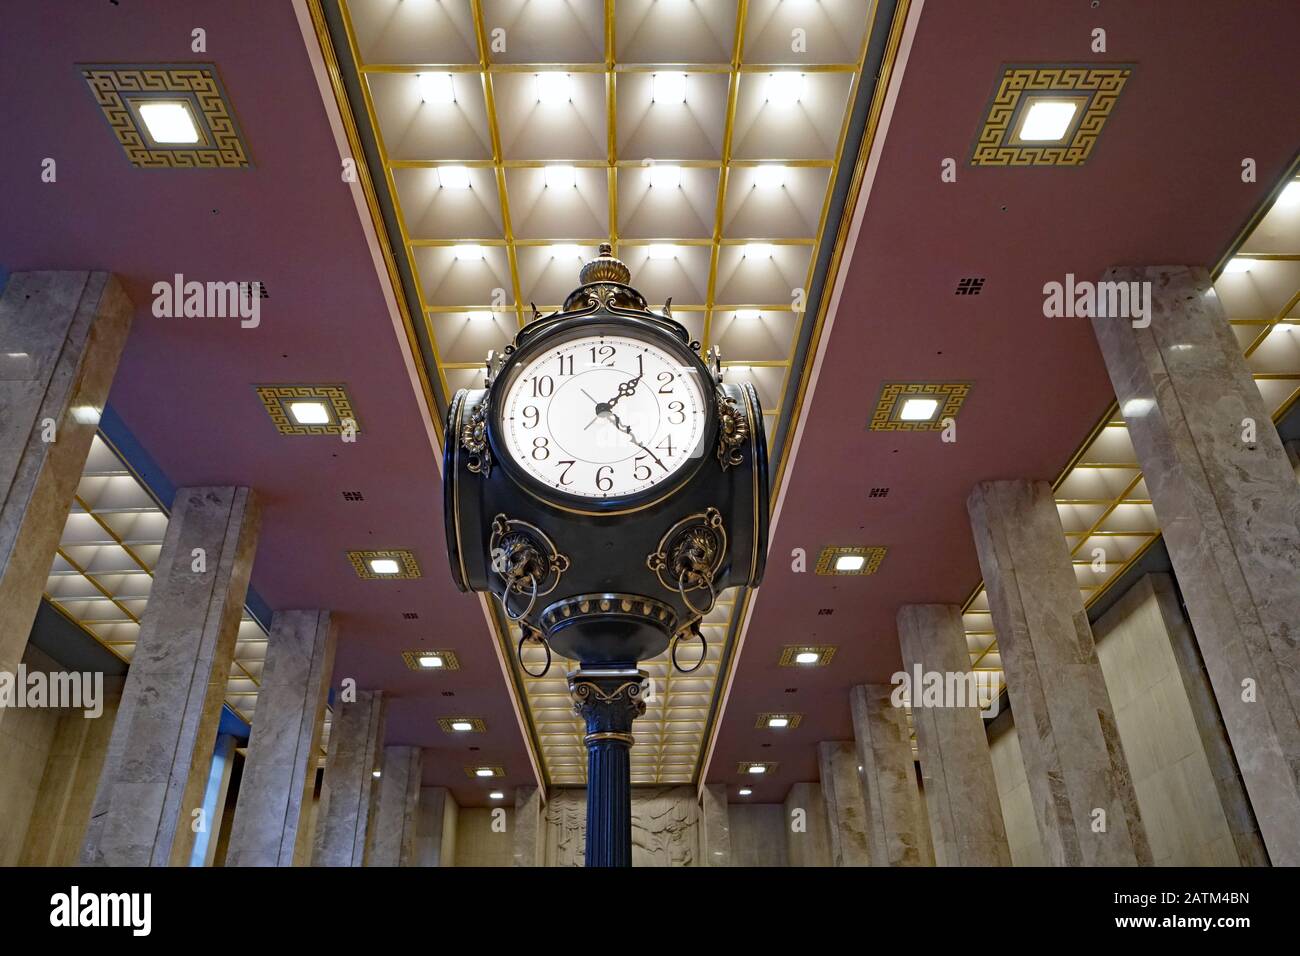 TORONTO - FEBRUARY 2020:  Large ornate clock in art deco style banking hall, head office of Scotiabank. Stock Photo